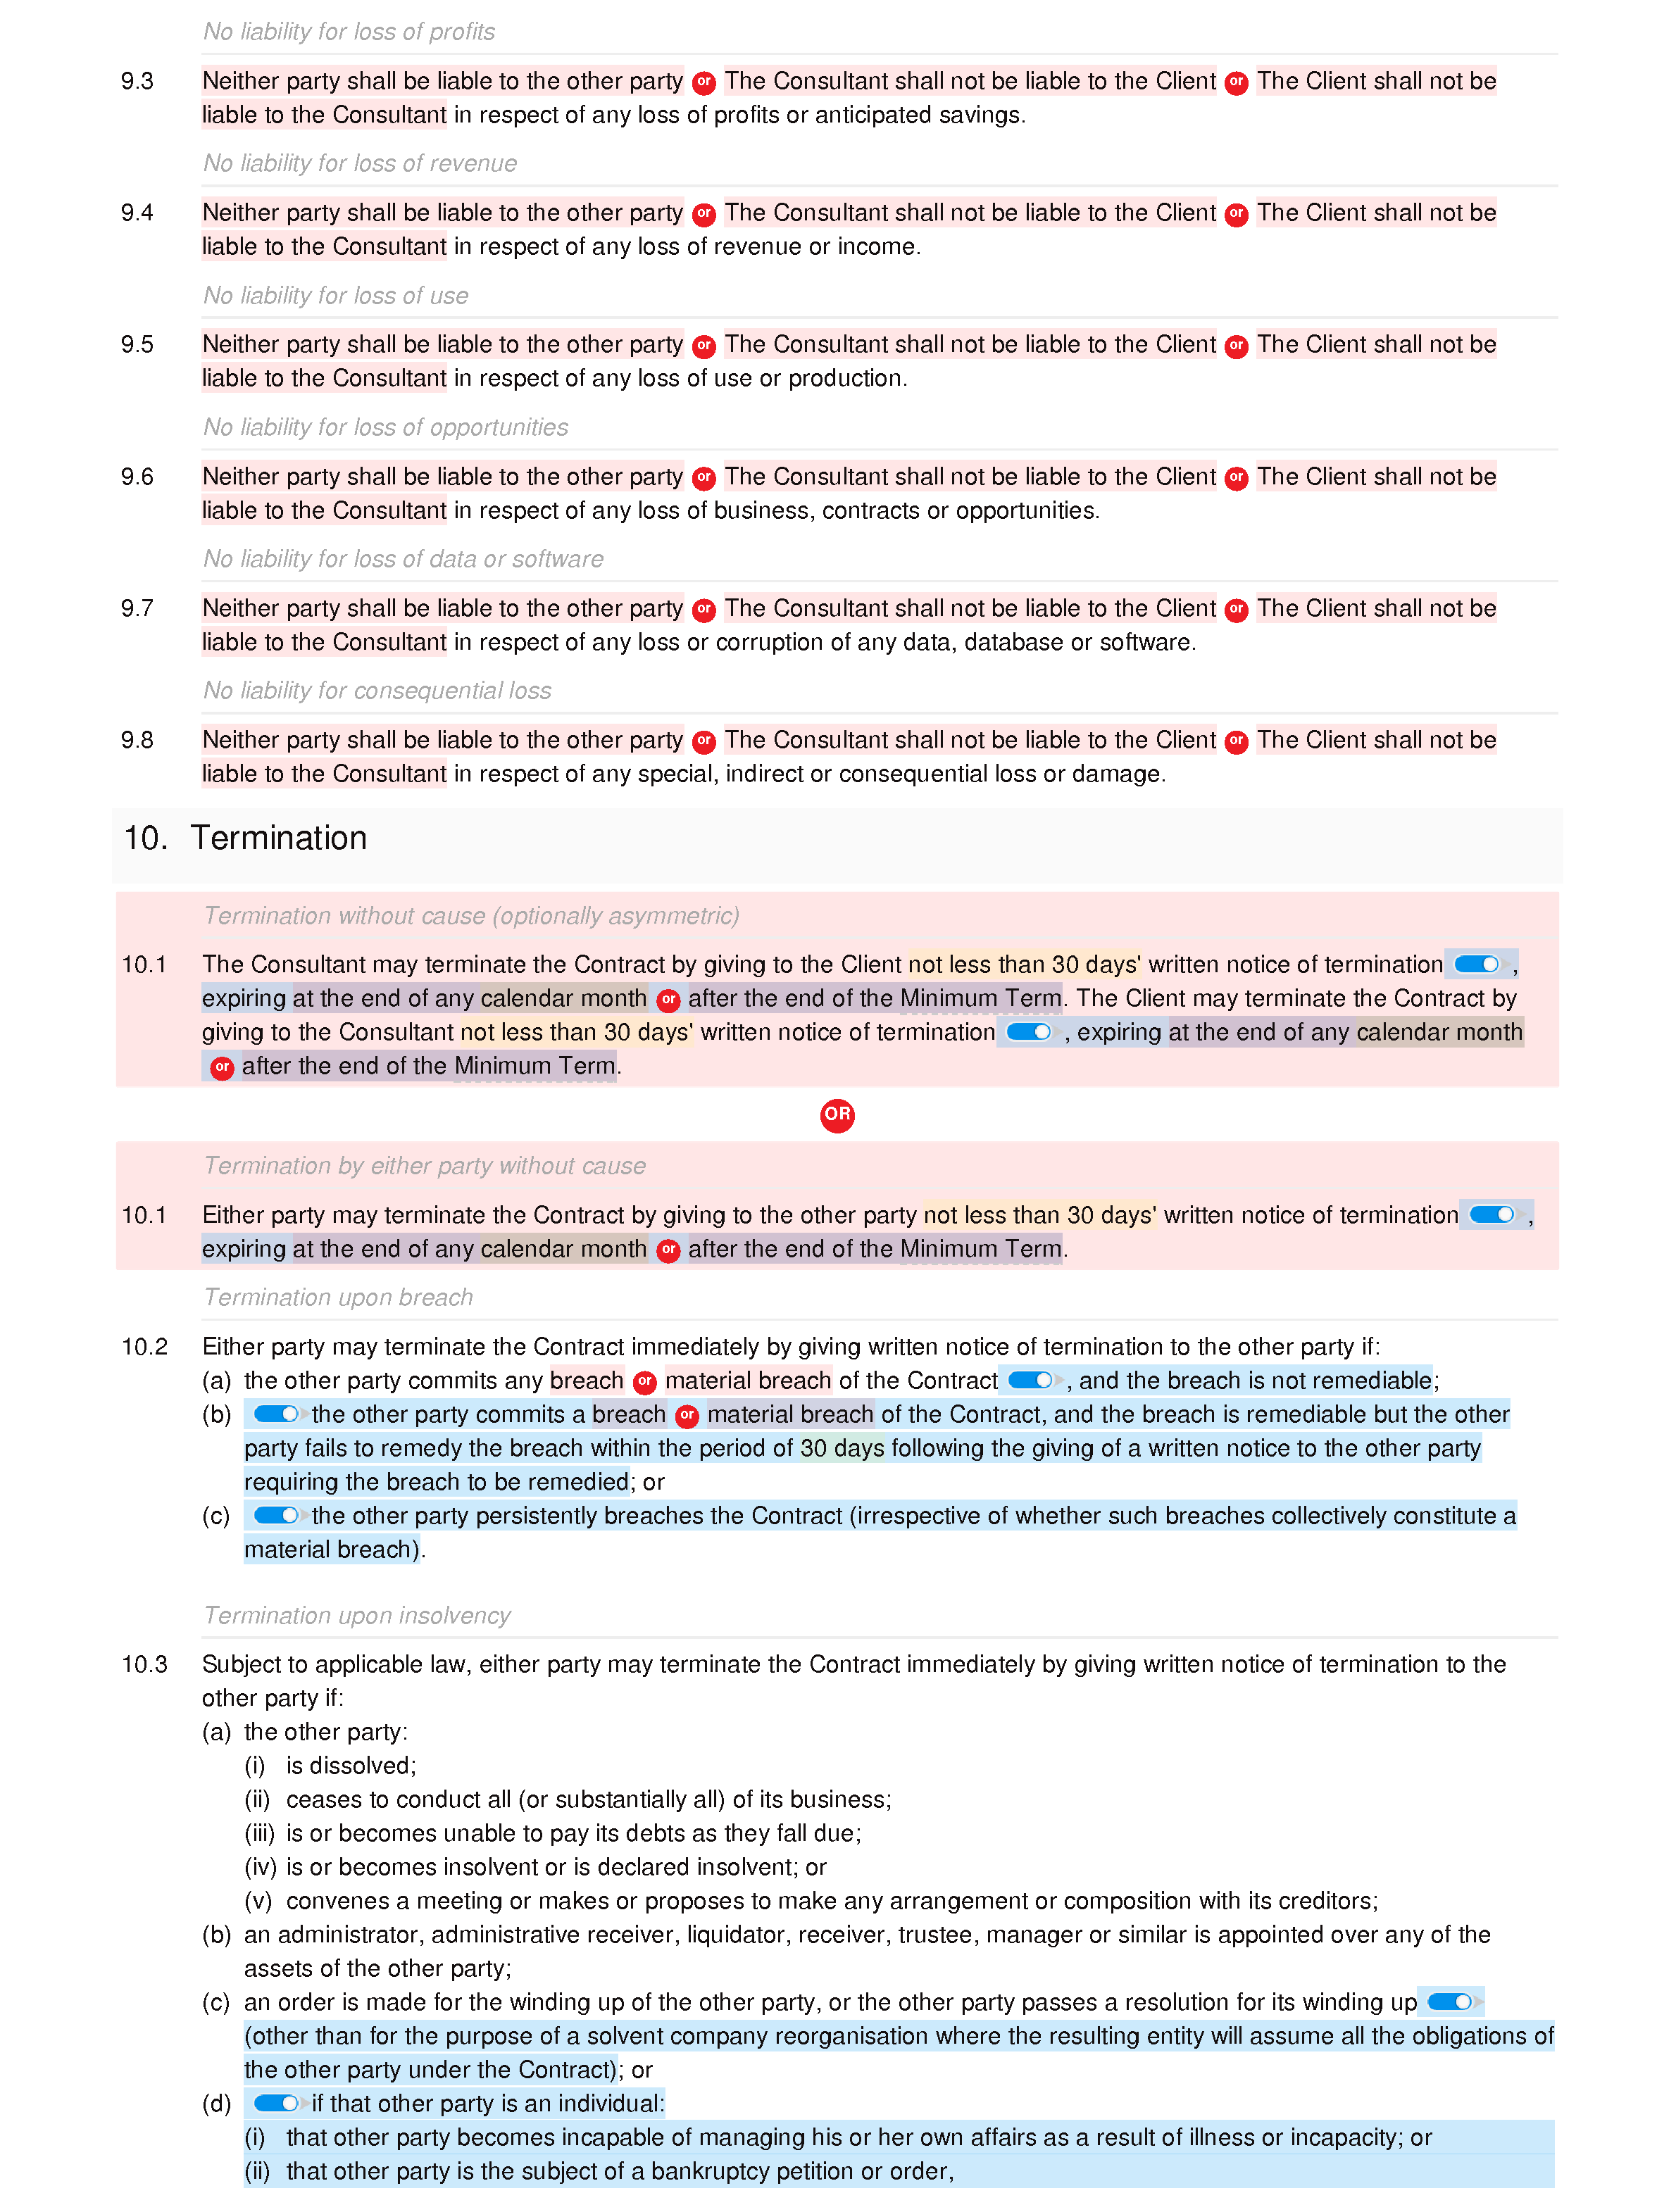 Consultancy terms and conditions (basic) document editor preview